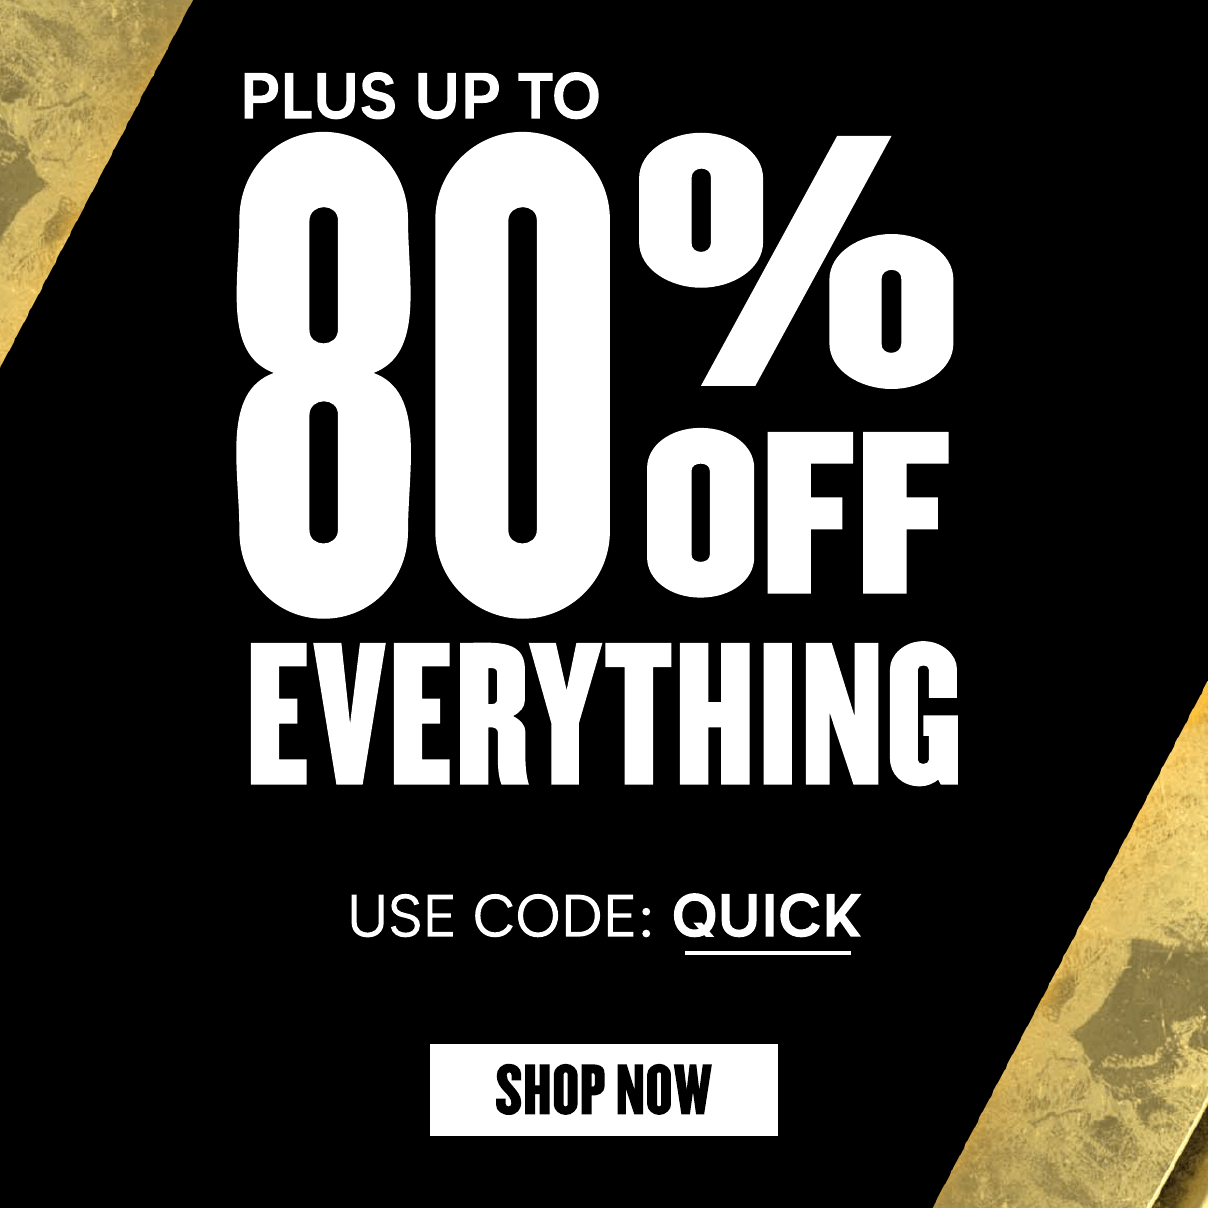 Up to 80% off EVERYTHING